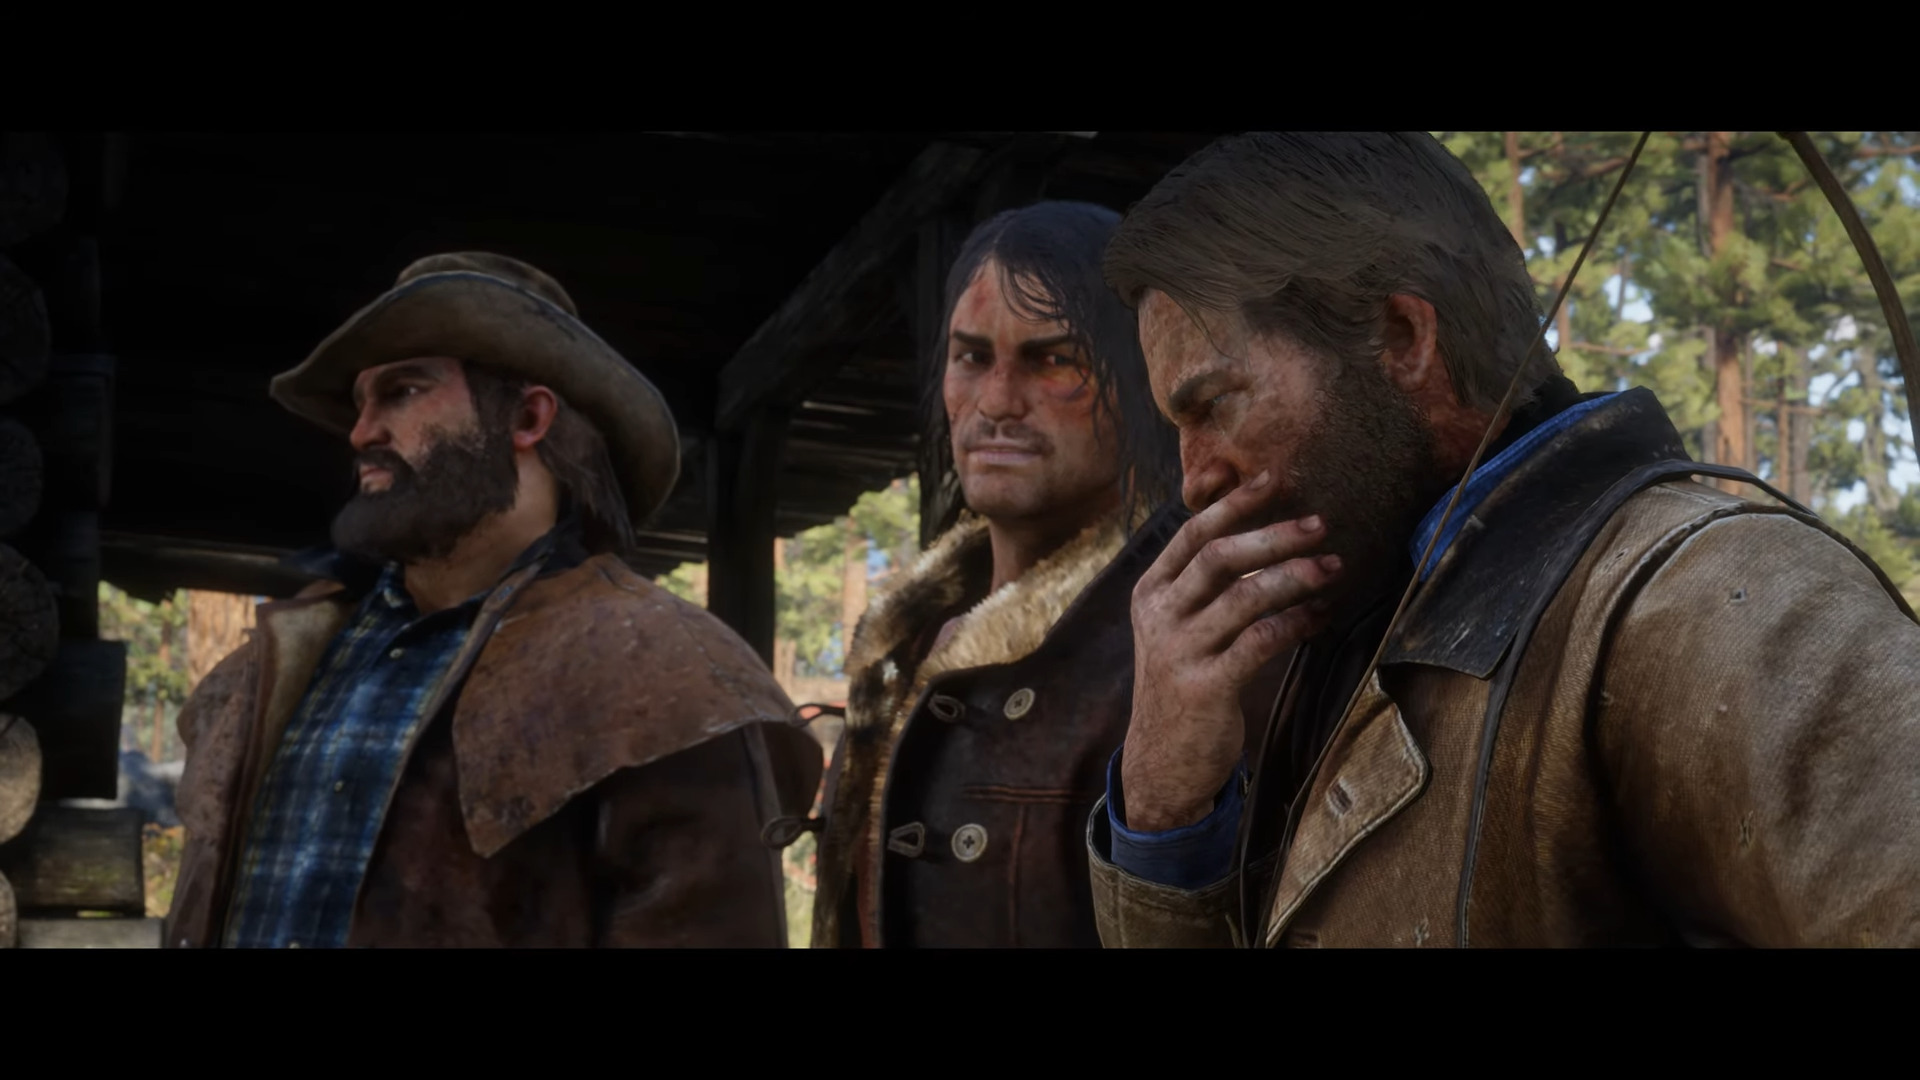 Arthur Morgan, John Marston, and Bill Williamson find themselves at a crossroads regarding what to do with Kieran Duffy in Red Dead Redemption 2 (2018)